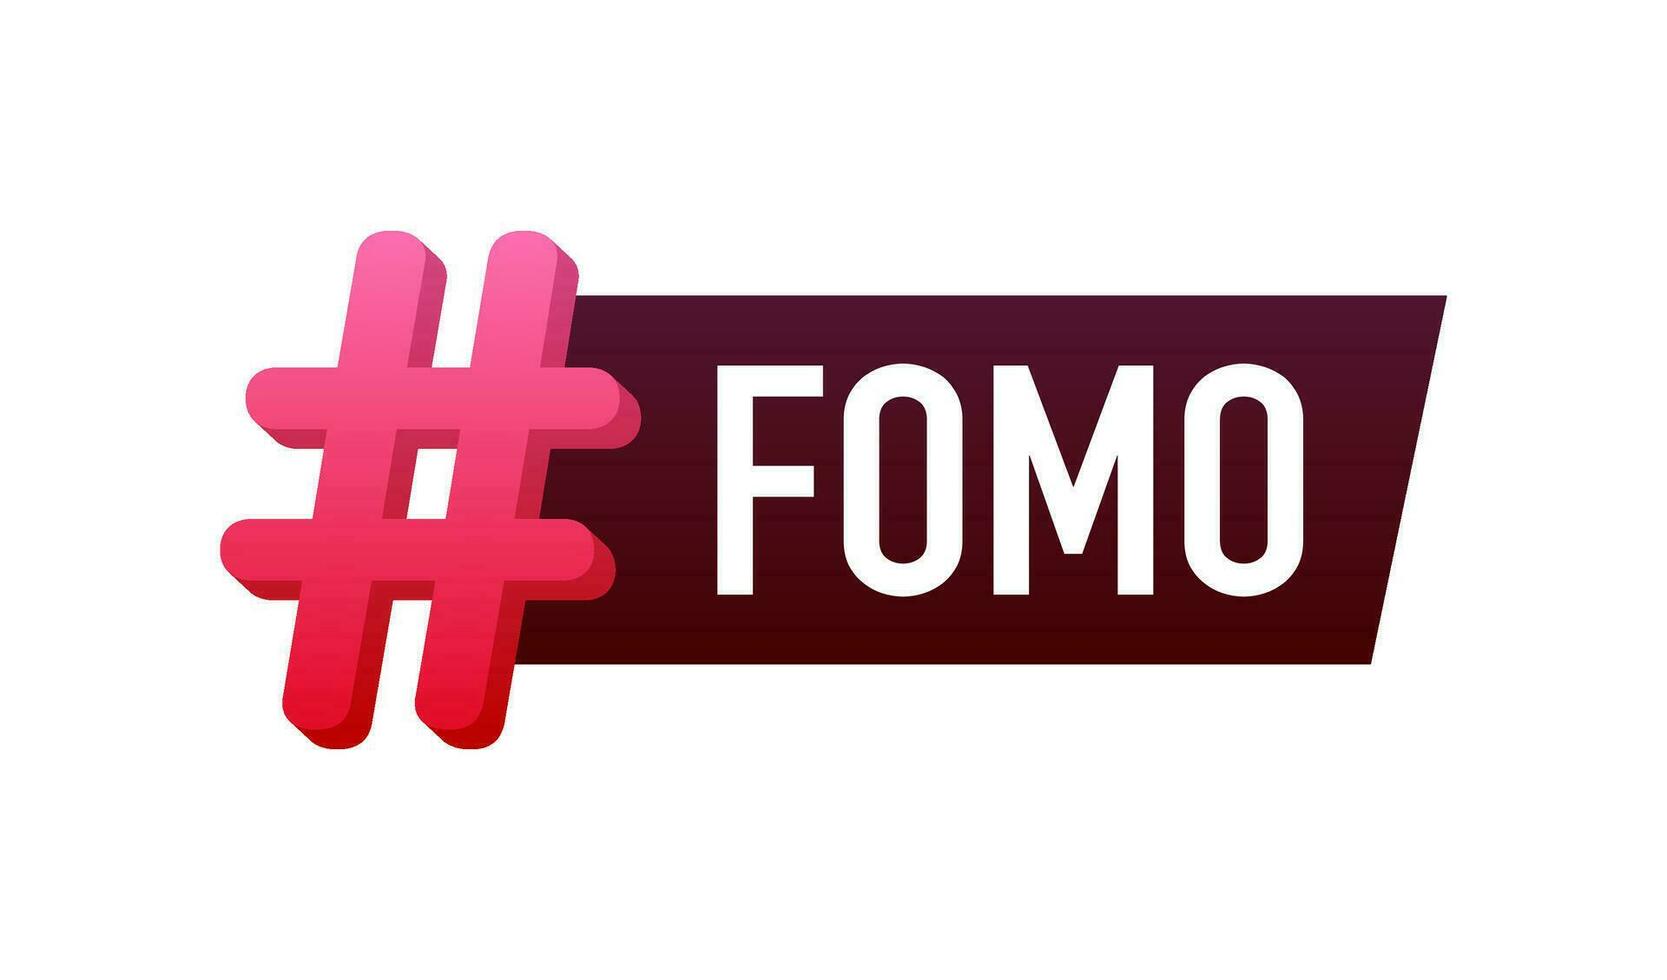 Modern hashtag fomo, great design for any purposes. Vector typography illustration. Flat cartoon vector illustration. Flat design. Social media concept